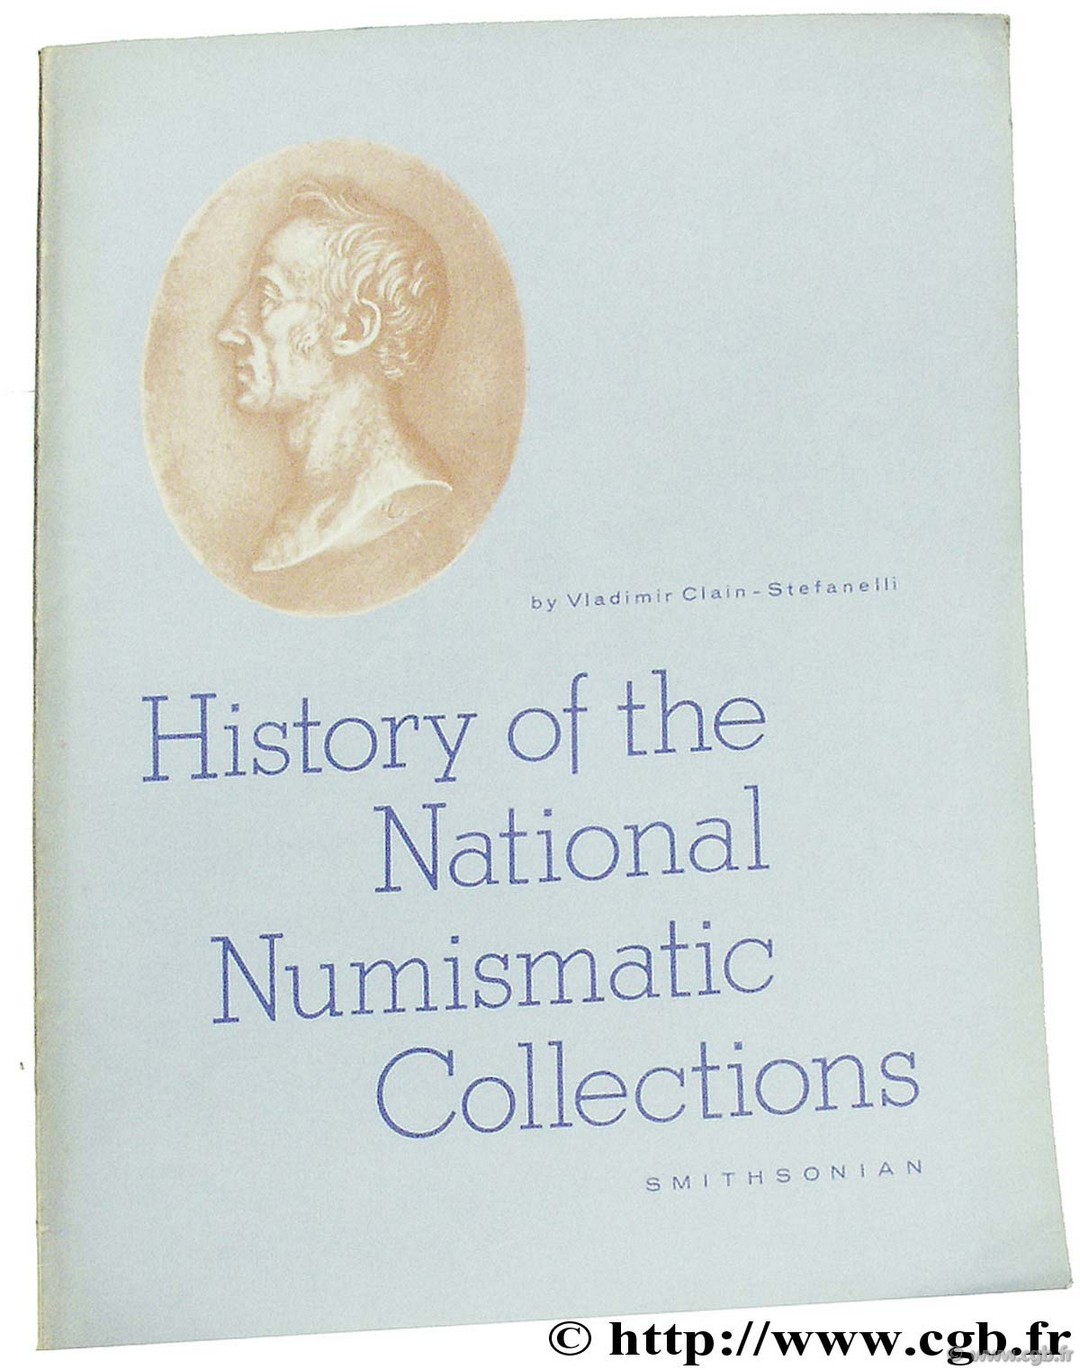 Contribution from The Museum of History and Technology. History of the National Numismatic Collections Smithsonian Museum CLAIN-STEFANELLI V.